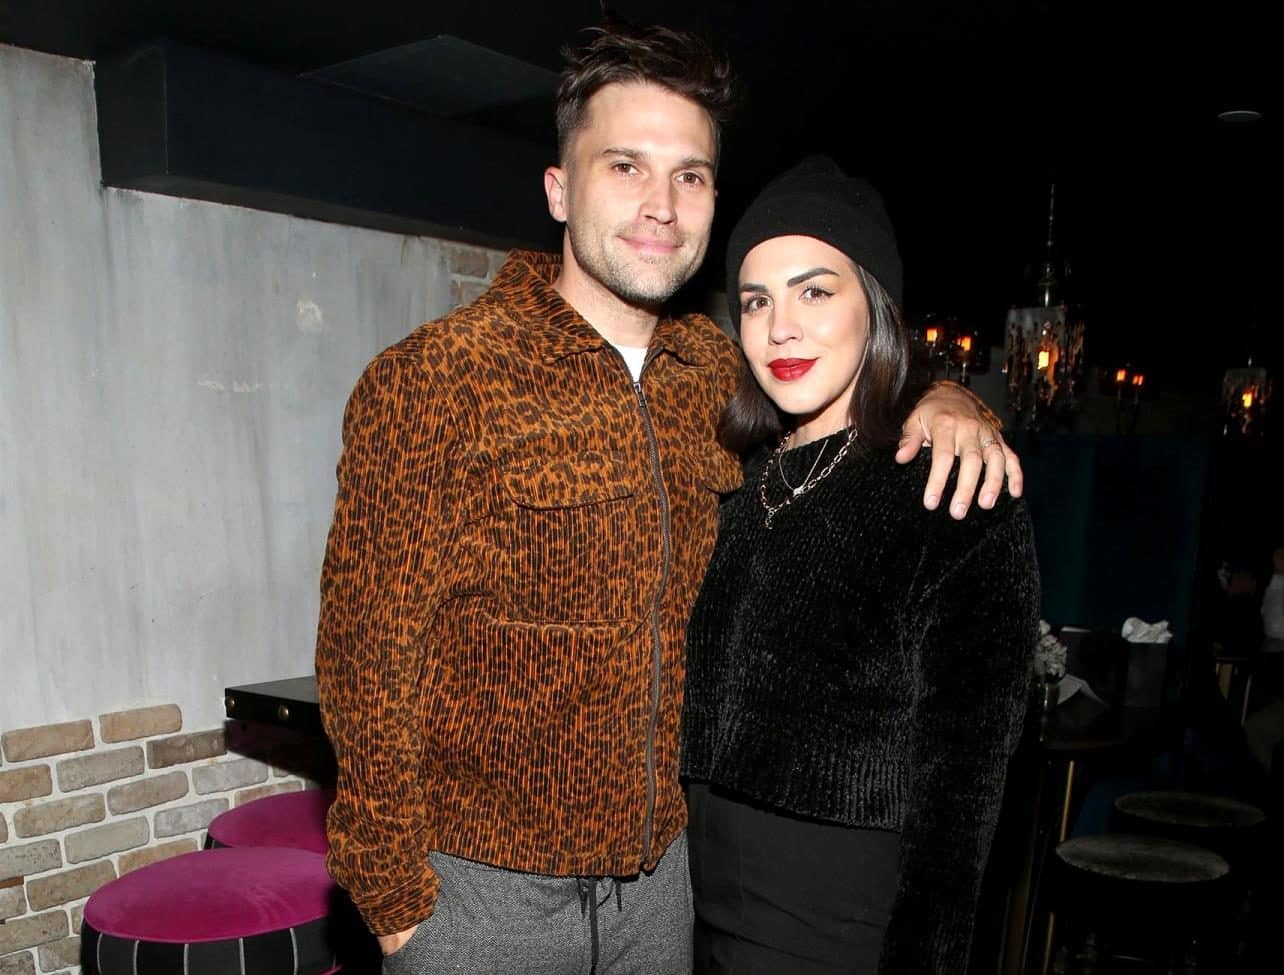 Pump Rules' Katie Maloney and Tom Schwartz to Split Profit From $2.5 Million Home as Divorce Settlement Details Are Revealed and Katie Debuts New Look